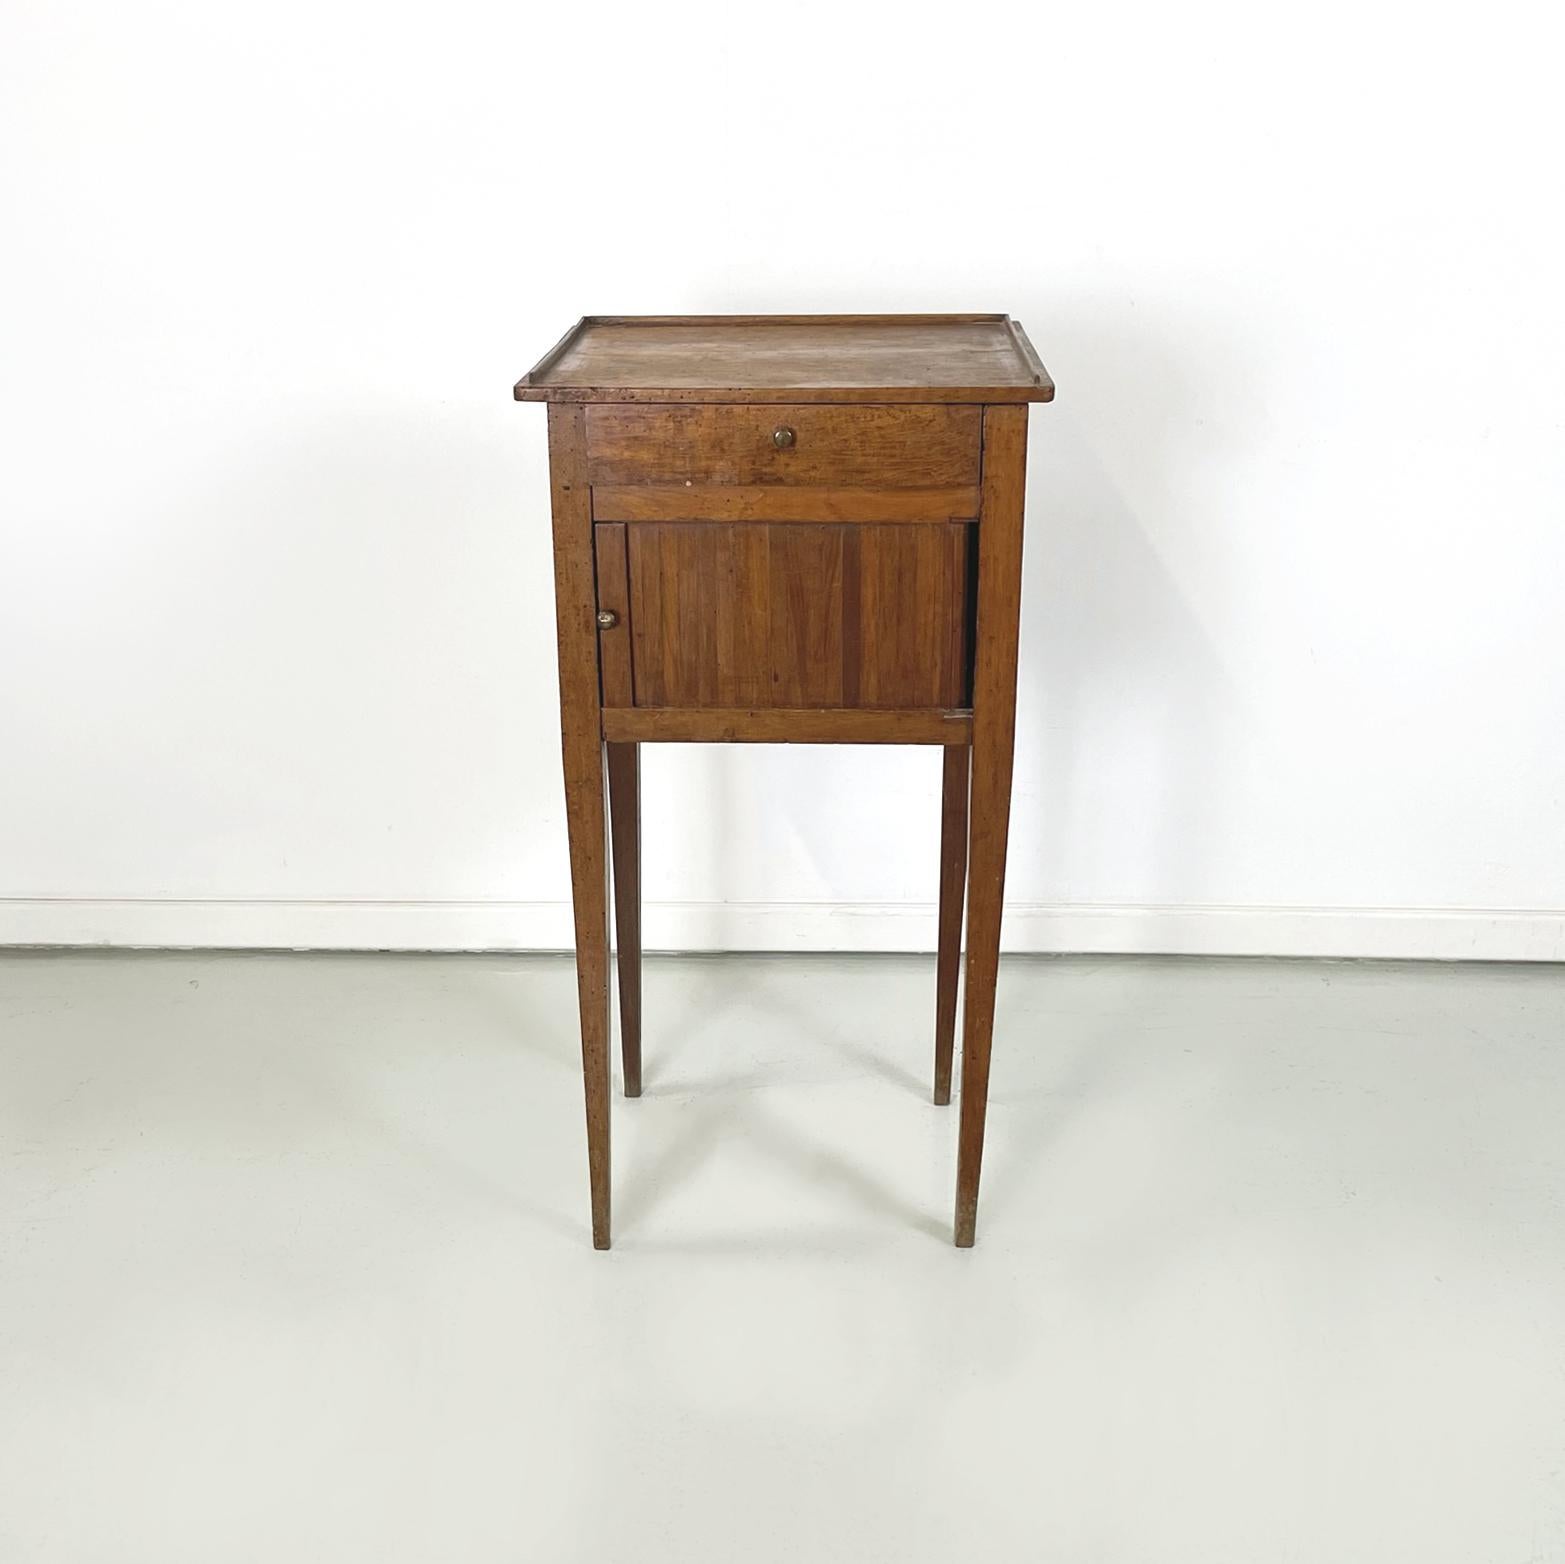 Italian antique Wooden bedside table with brass handle, early 1900s
Bedside table or service table with rectangular top, entirely in solid wood. On the front it has a drawer and a compartment with a sliding door. Round base handles in brass. Square